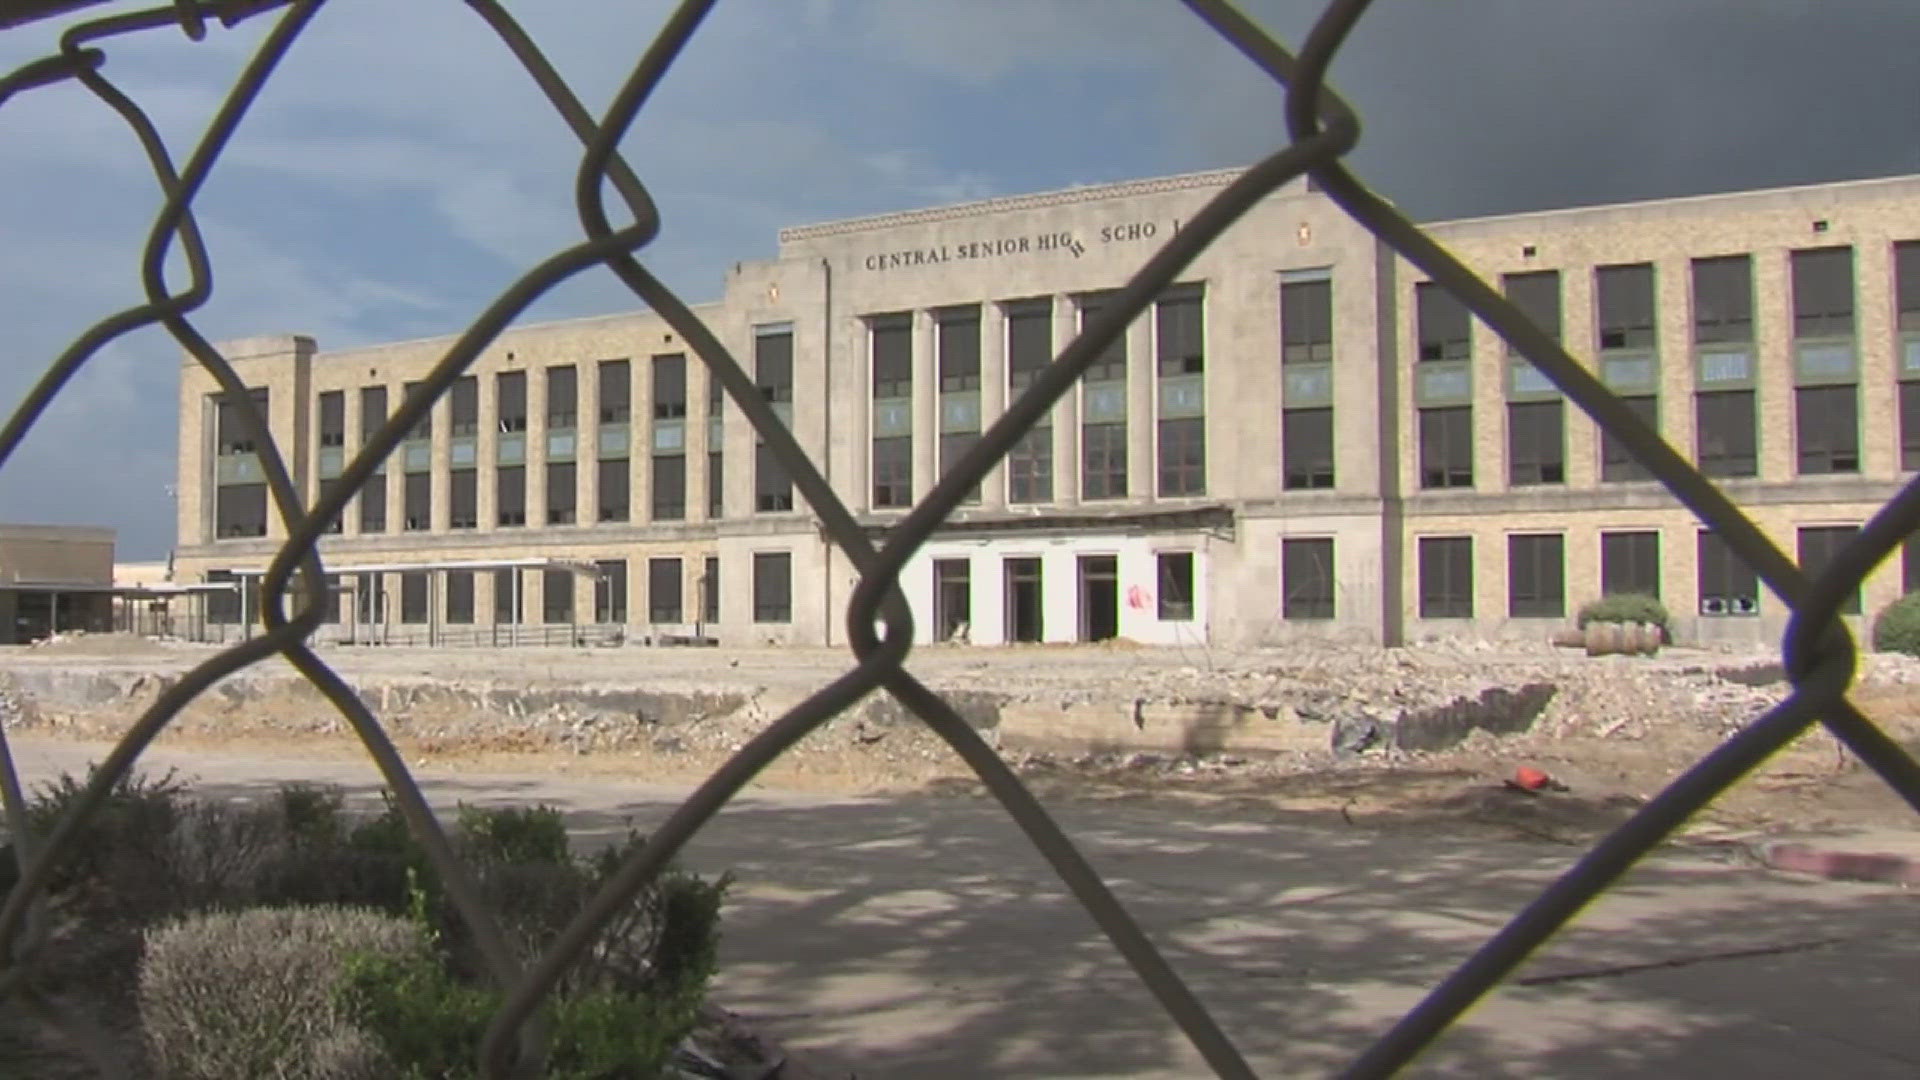 Work to demolish the old Beaumont Central High School is moving along. The campus has been mostly vacant since Tropical Storm Harvey in 2017.